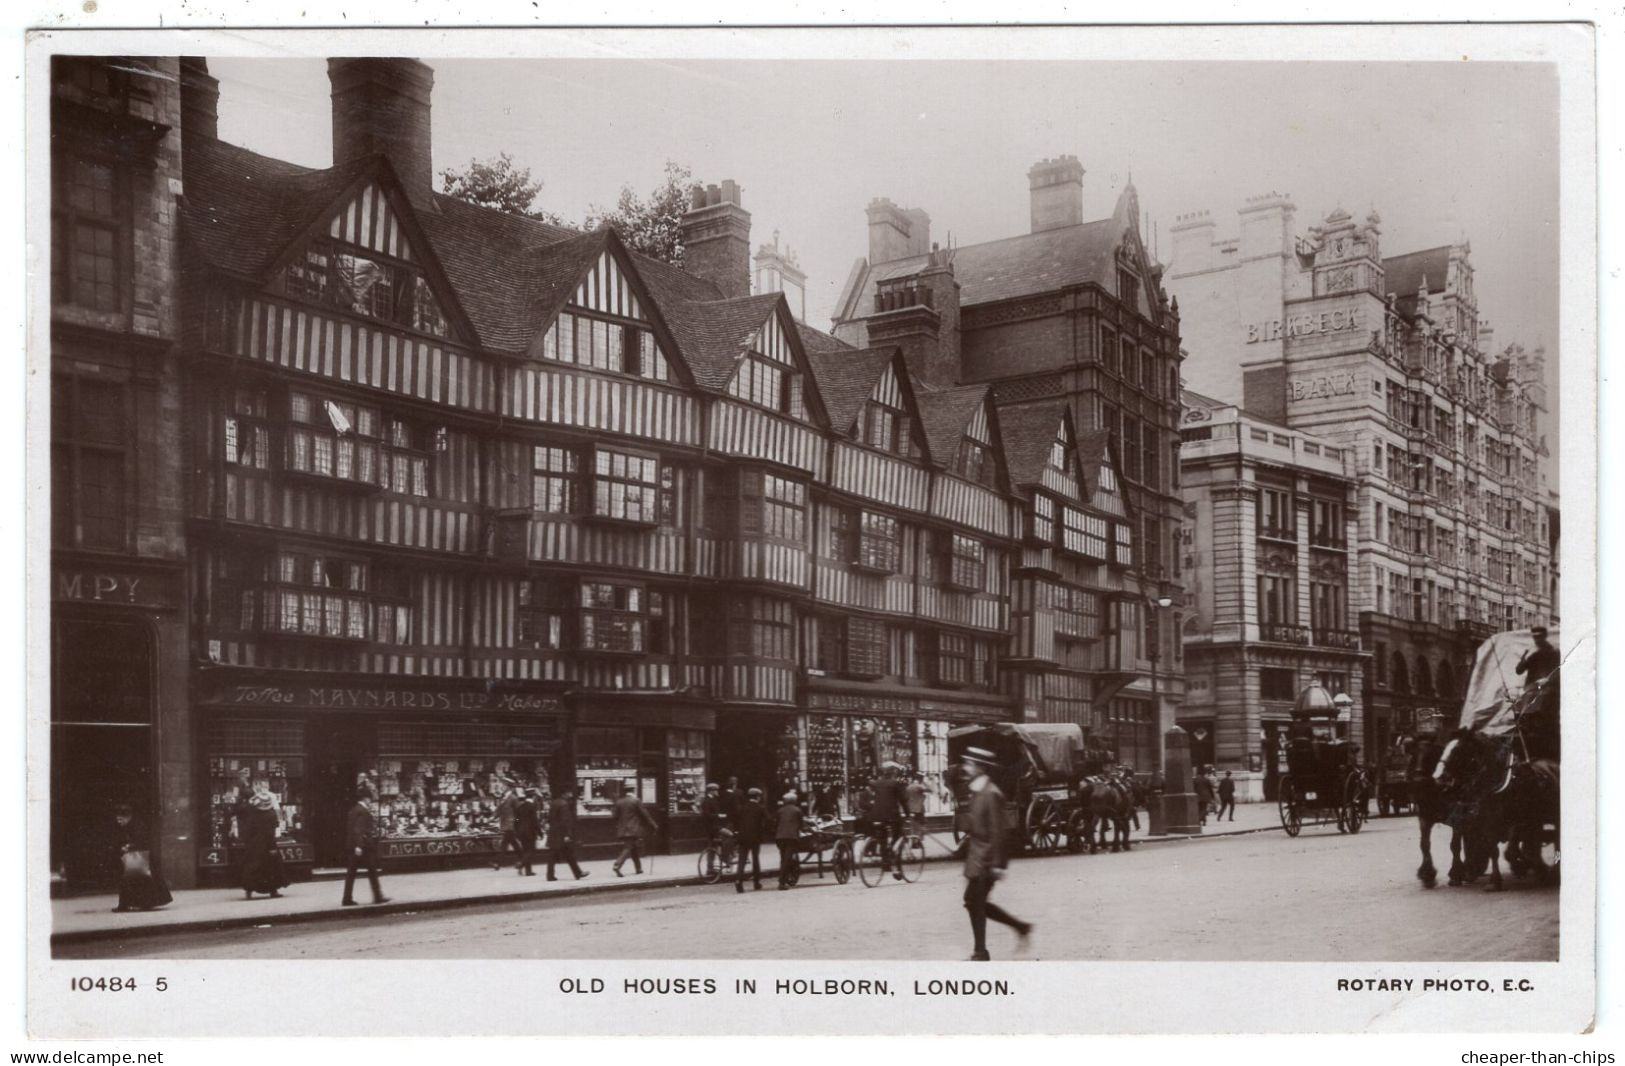 LONDON - Old Houses In Holborn - Rotary Photo 10484 5 - Westminster Abbey